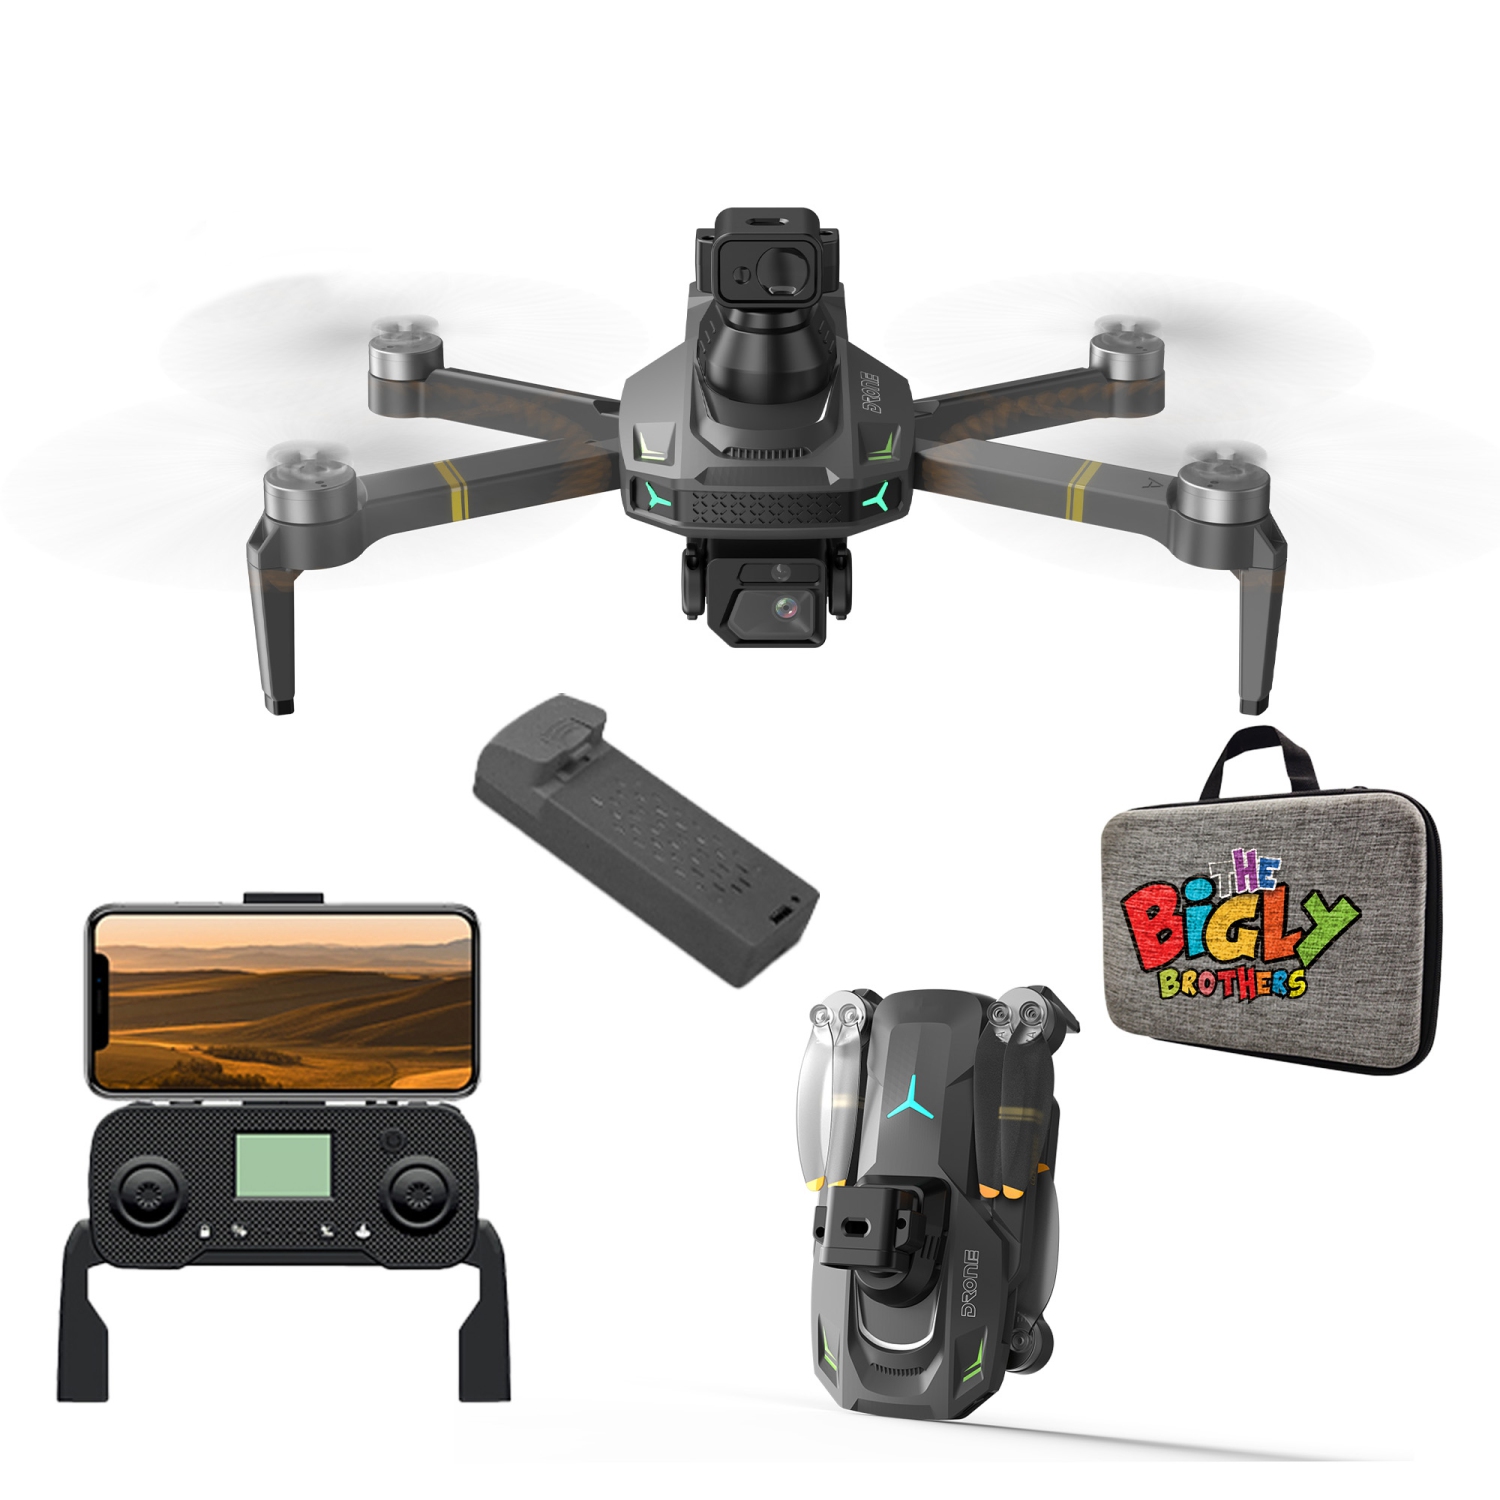 Open Box - The Bigly Brothers E59 Mark III Delta Black Superior Edition, GPS Drone, 249 Grams, 4k Camera, 1 Key Return Home, All Around Obstacle Avoidance, Case & 1 Batt Included